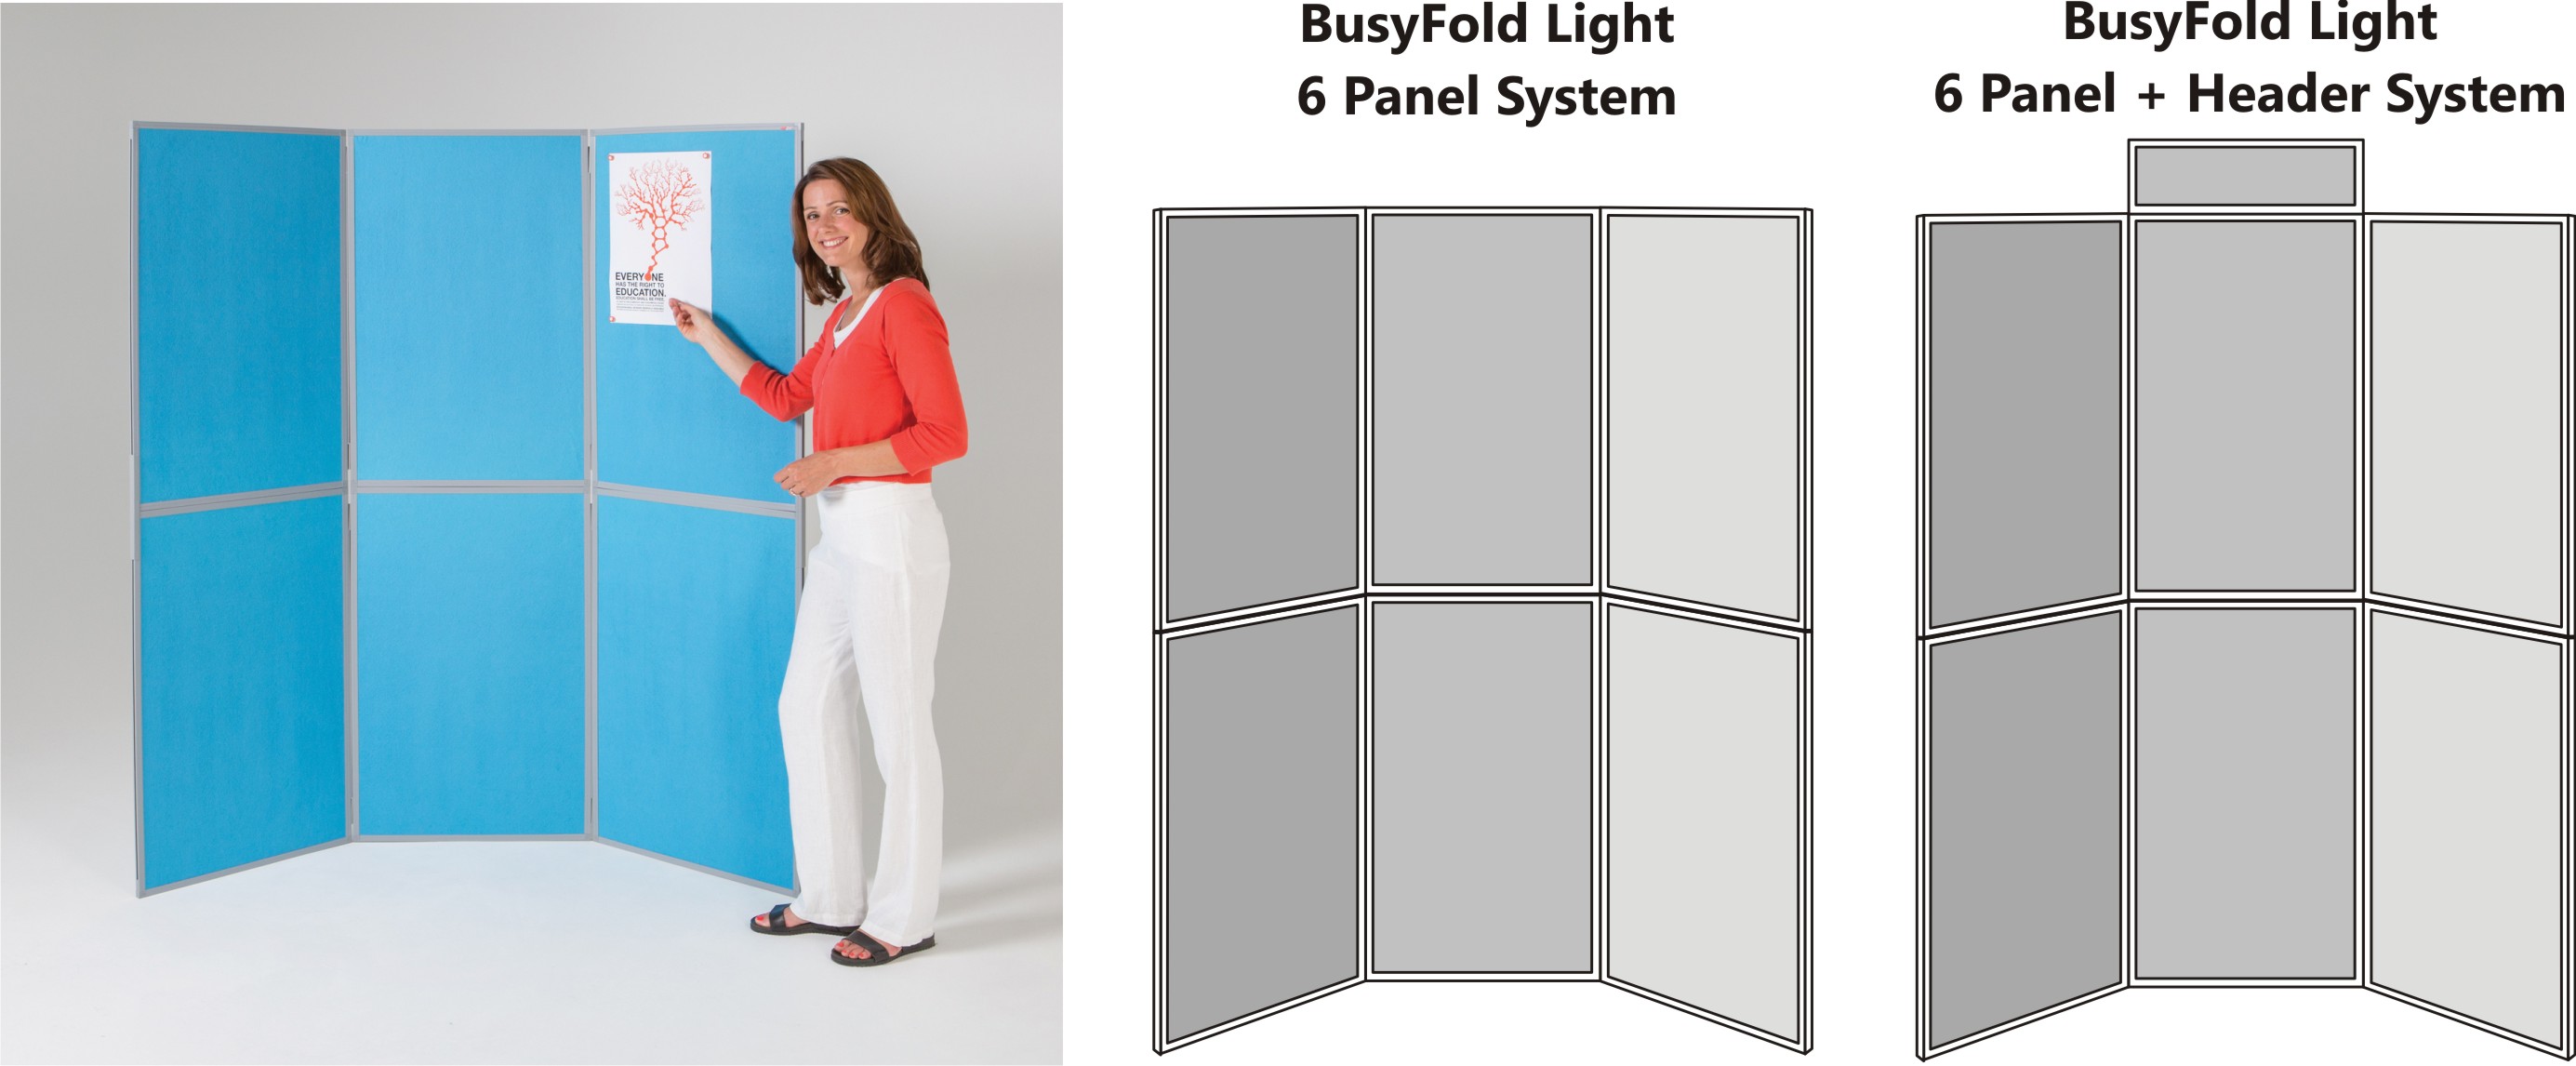 BusyFold Light 6 Panel Display System